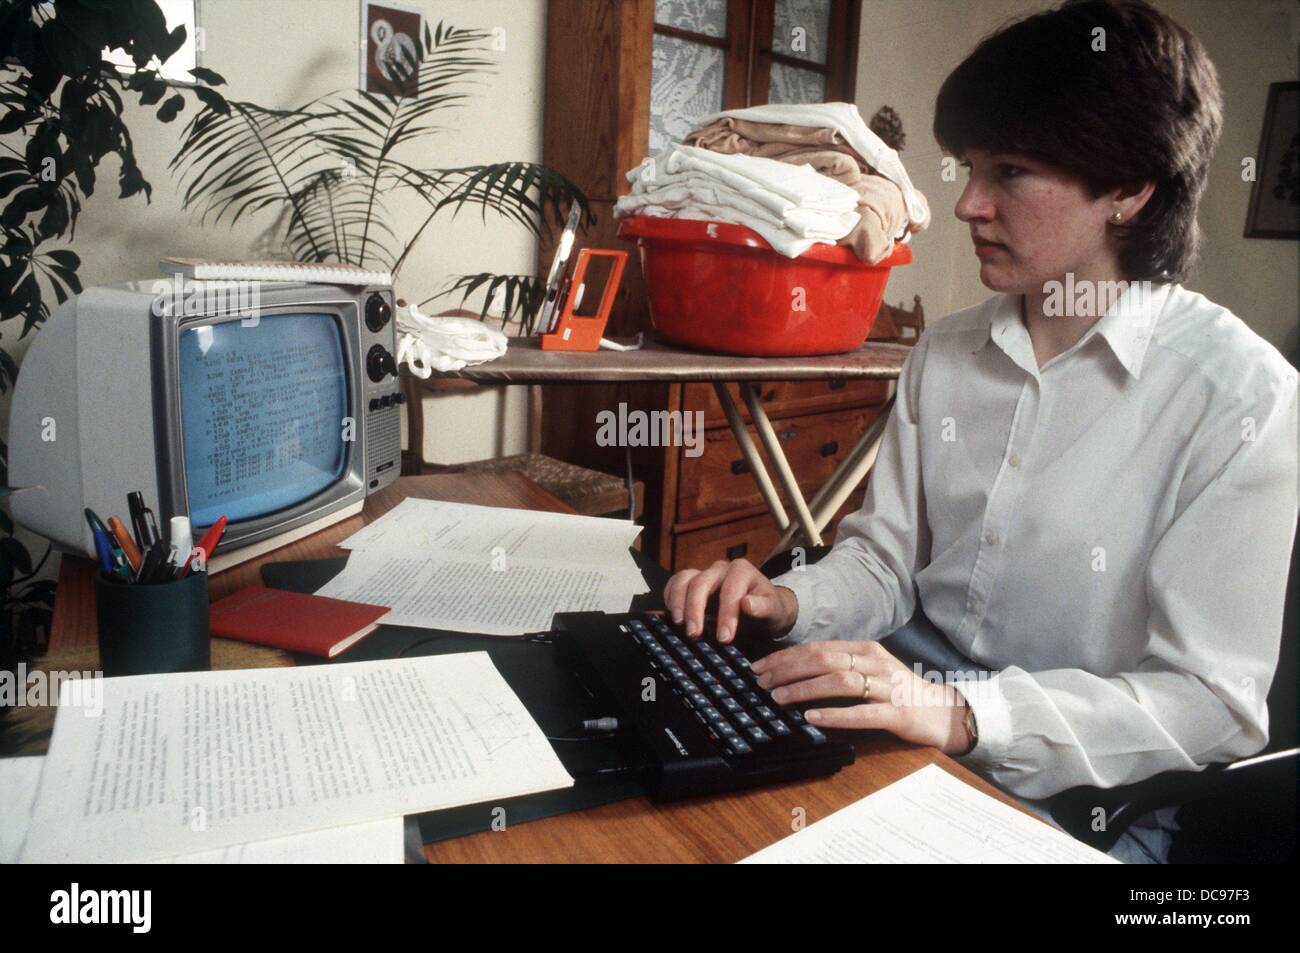 A housewife works at her computer while the ironing waits to be done in the background. Picture from 1985. Stock Photo